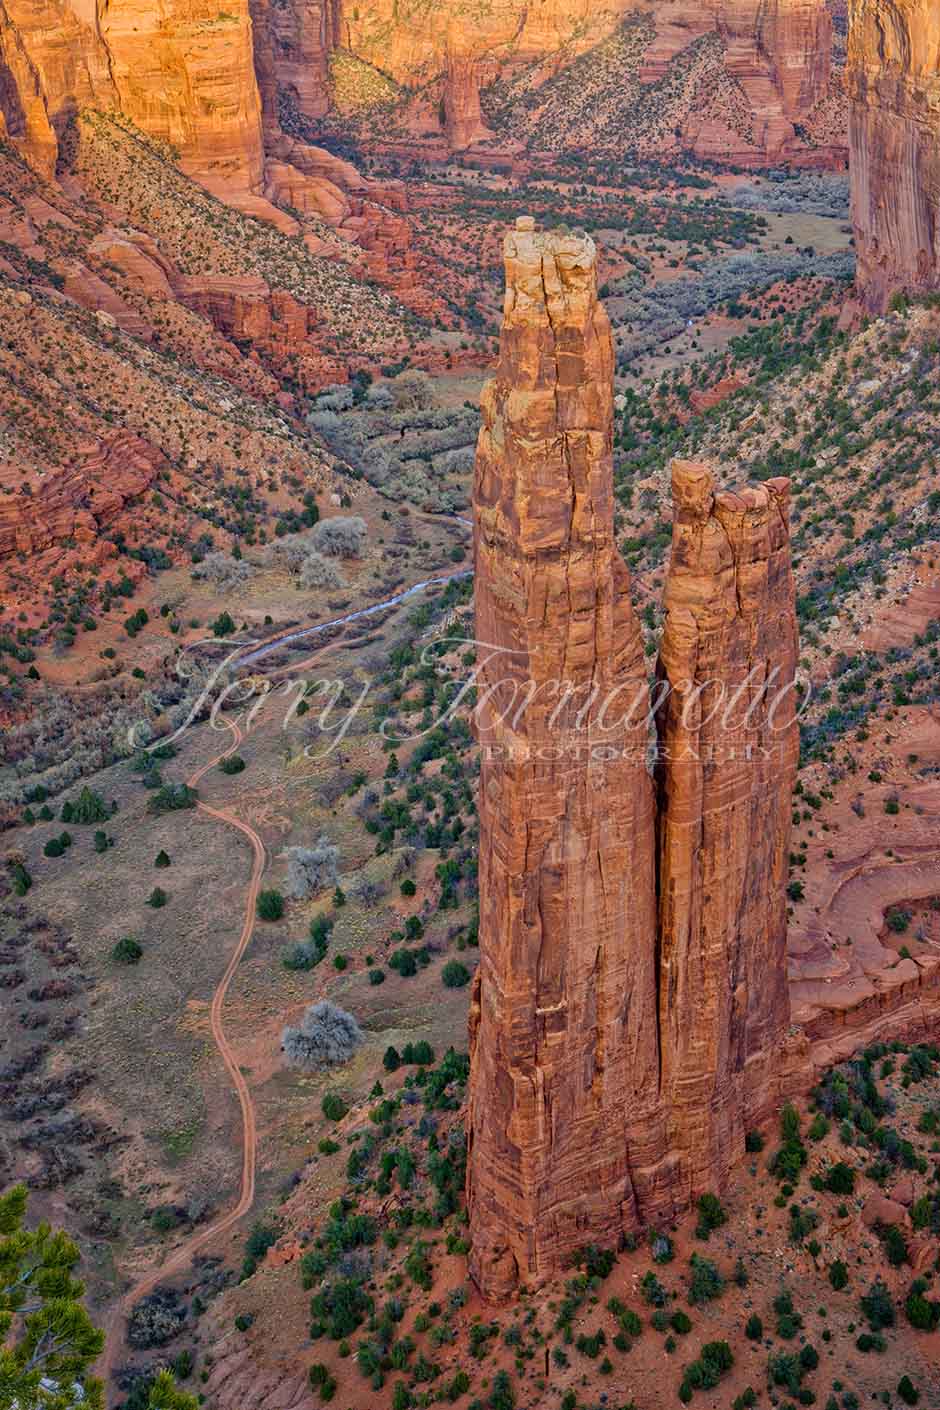 The park's distinctive geologic feature, Spider Rock, is a sandstone spire that rises 750 feet (229 m) from the canyon floor at the junction of Canyon de Chelly and Monument Canyon. Spider Rock can be seen from South Rim Drive. It has served as the scene of a number of television commercials. According to traditional Navajo beliefs the taller of the two spires is the home of Spider Grandmother.